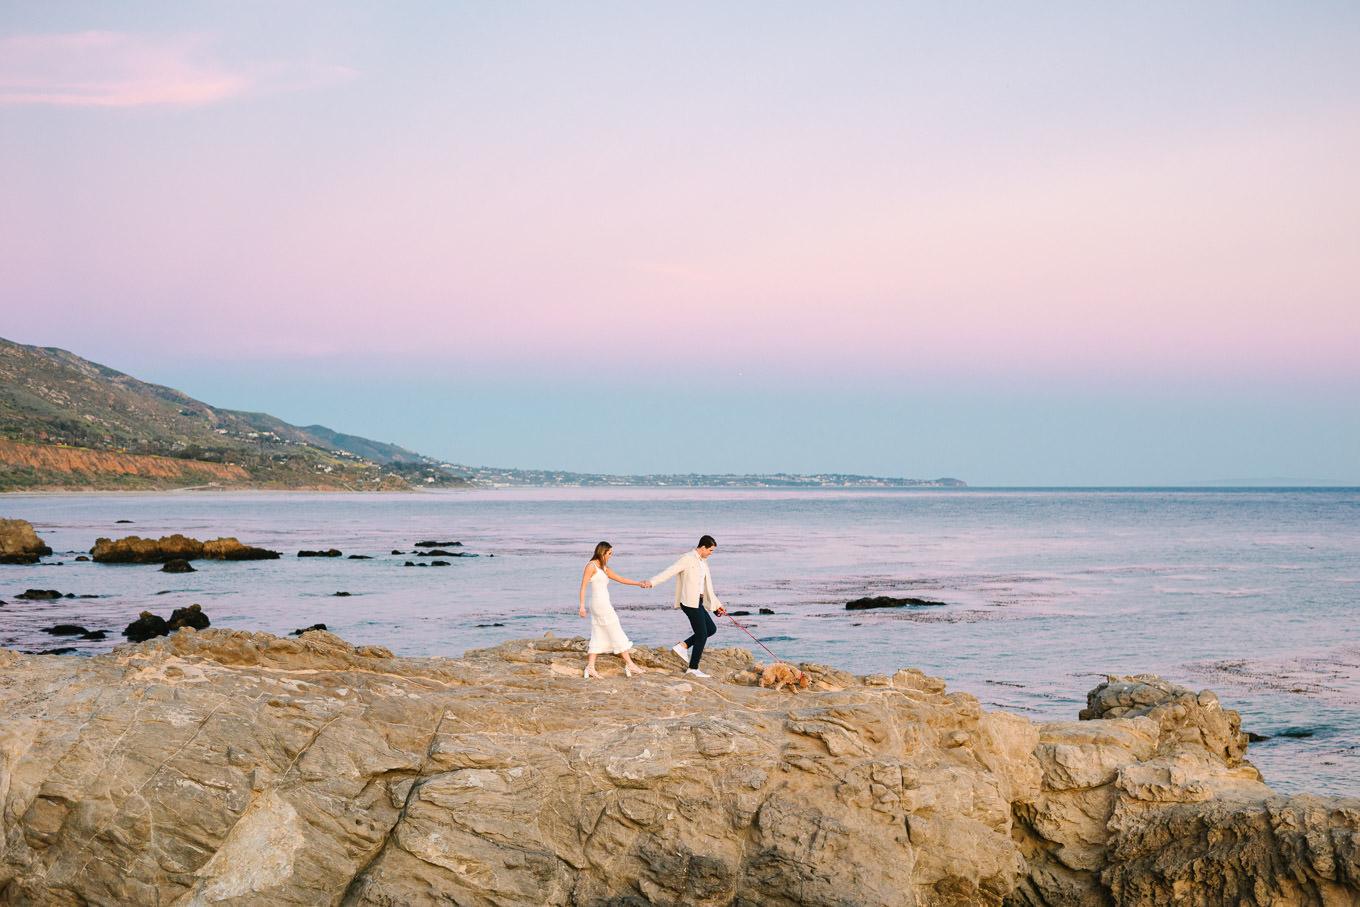 Malibu beach sunset engagement session | Wedding and elopement photography roundup | Los Angeles and Palm Springs photographer | #losangeleswedding #palmspringswedding #elopementphotographer Source: Mary Costa Photography | Los Angeles